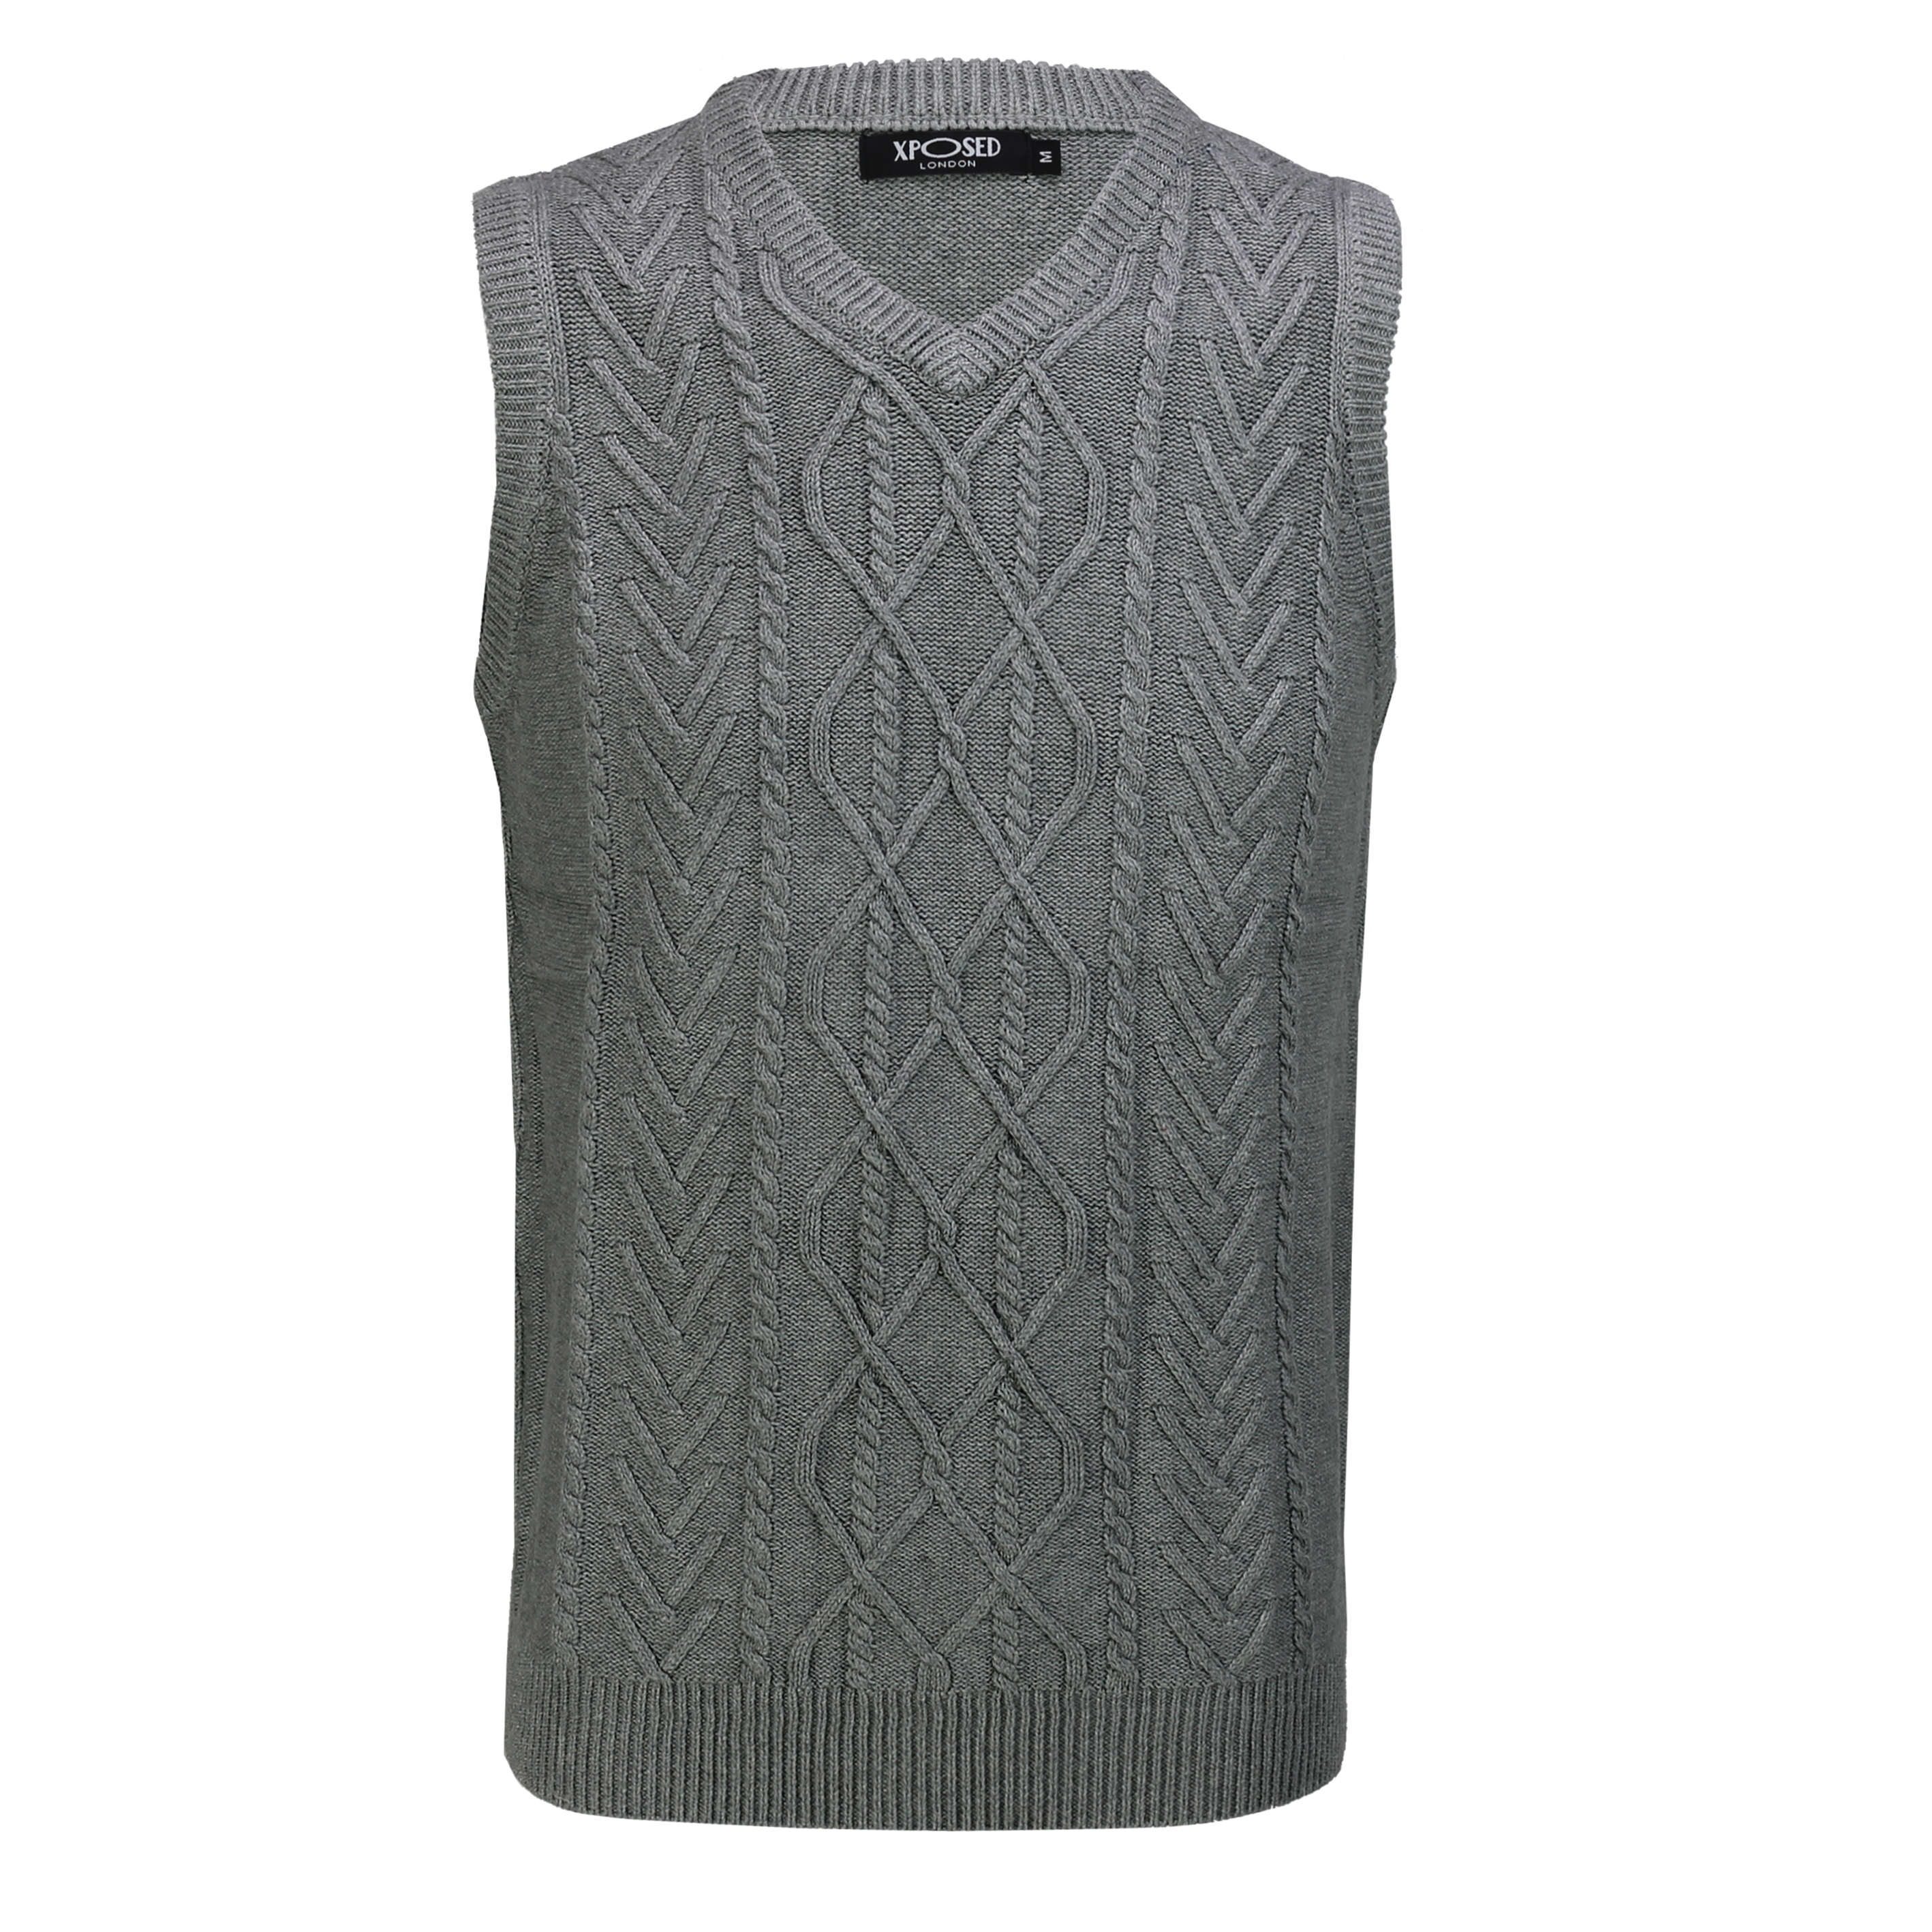 Classic Sleeveless V Neck Grey Jumper Cable Knitted